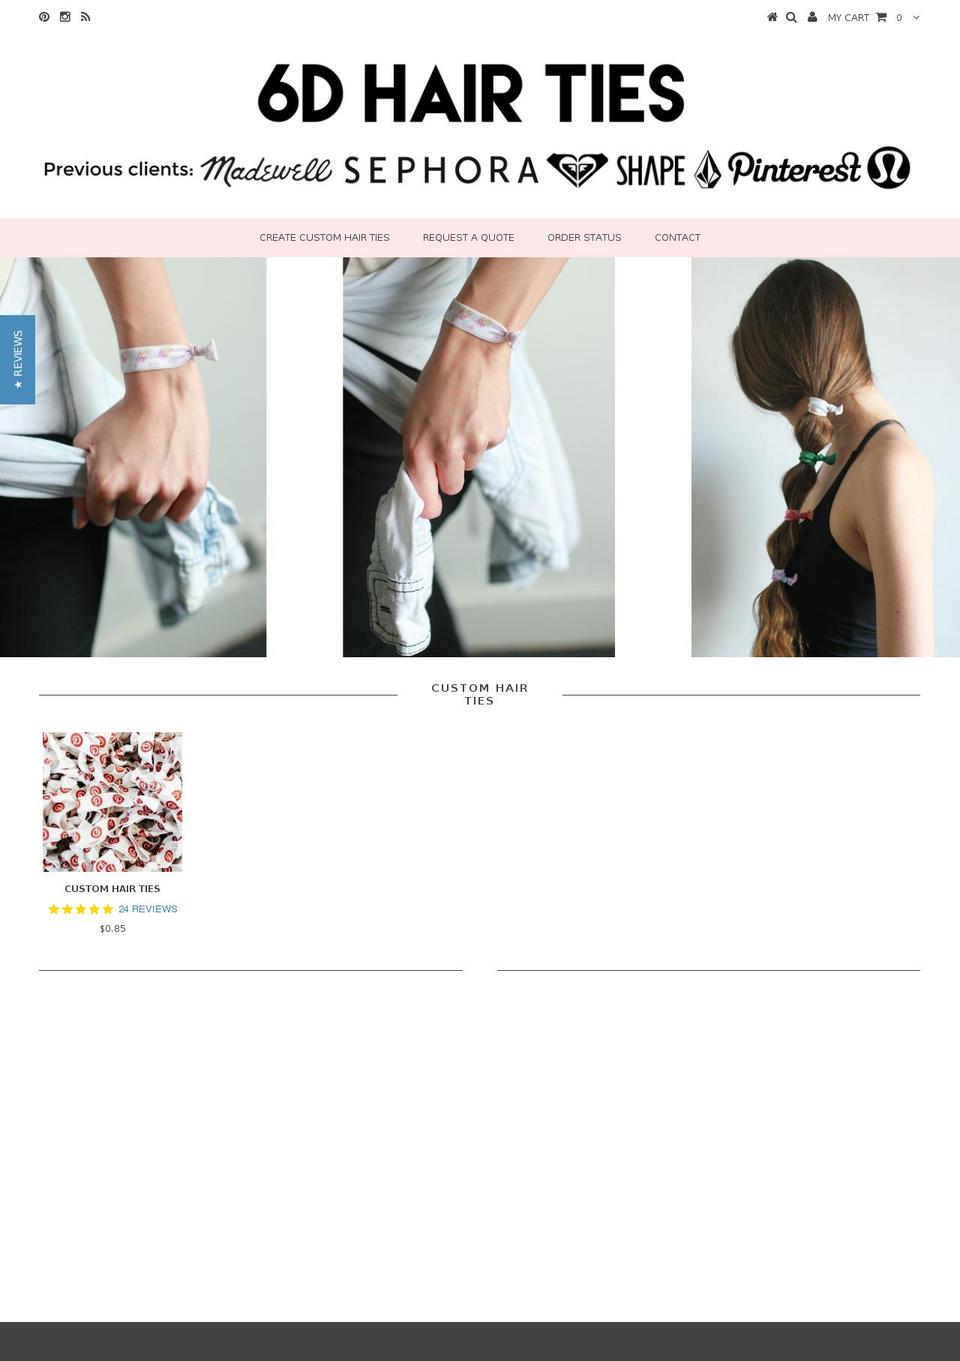 Taste Shopify theme site example 6dhairties.com